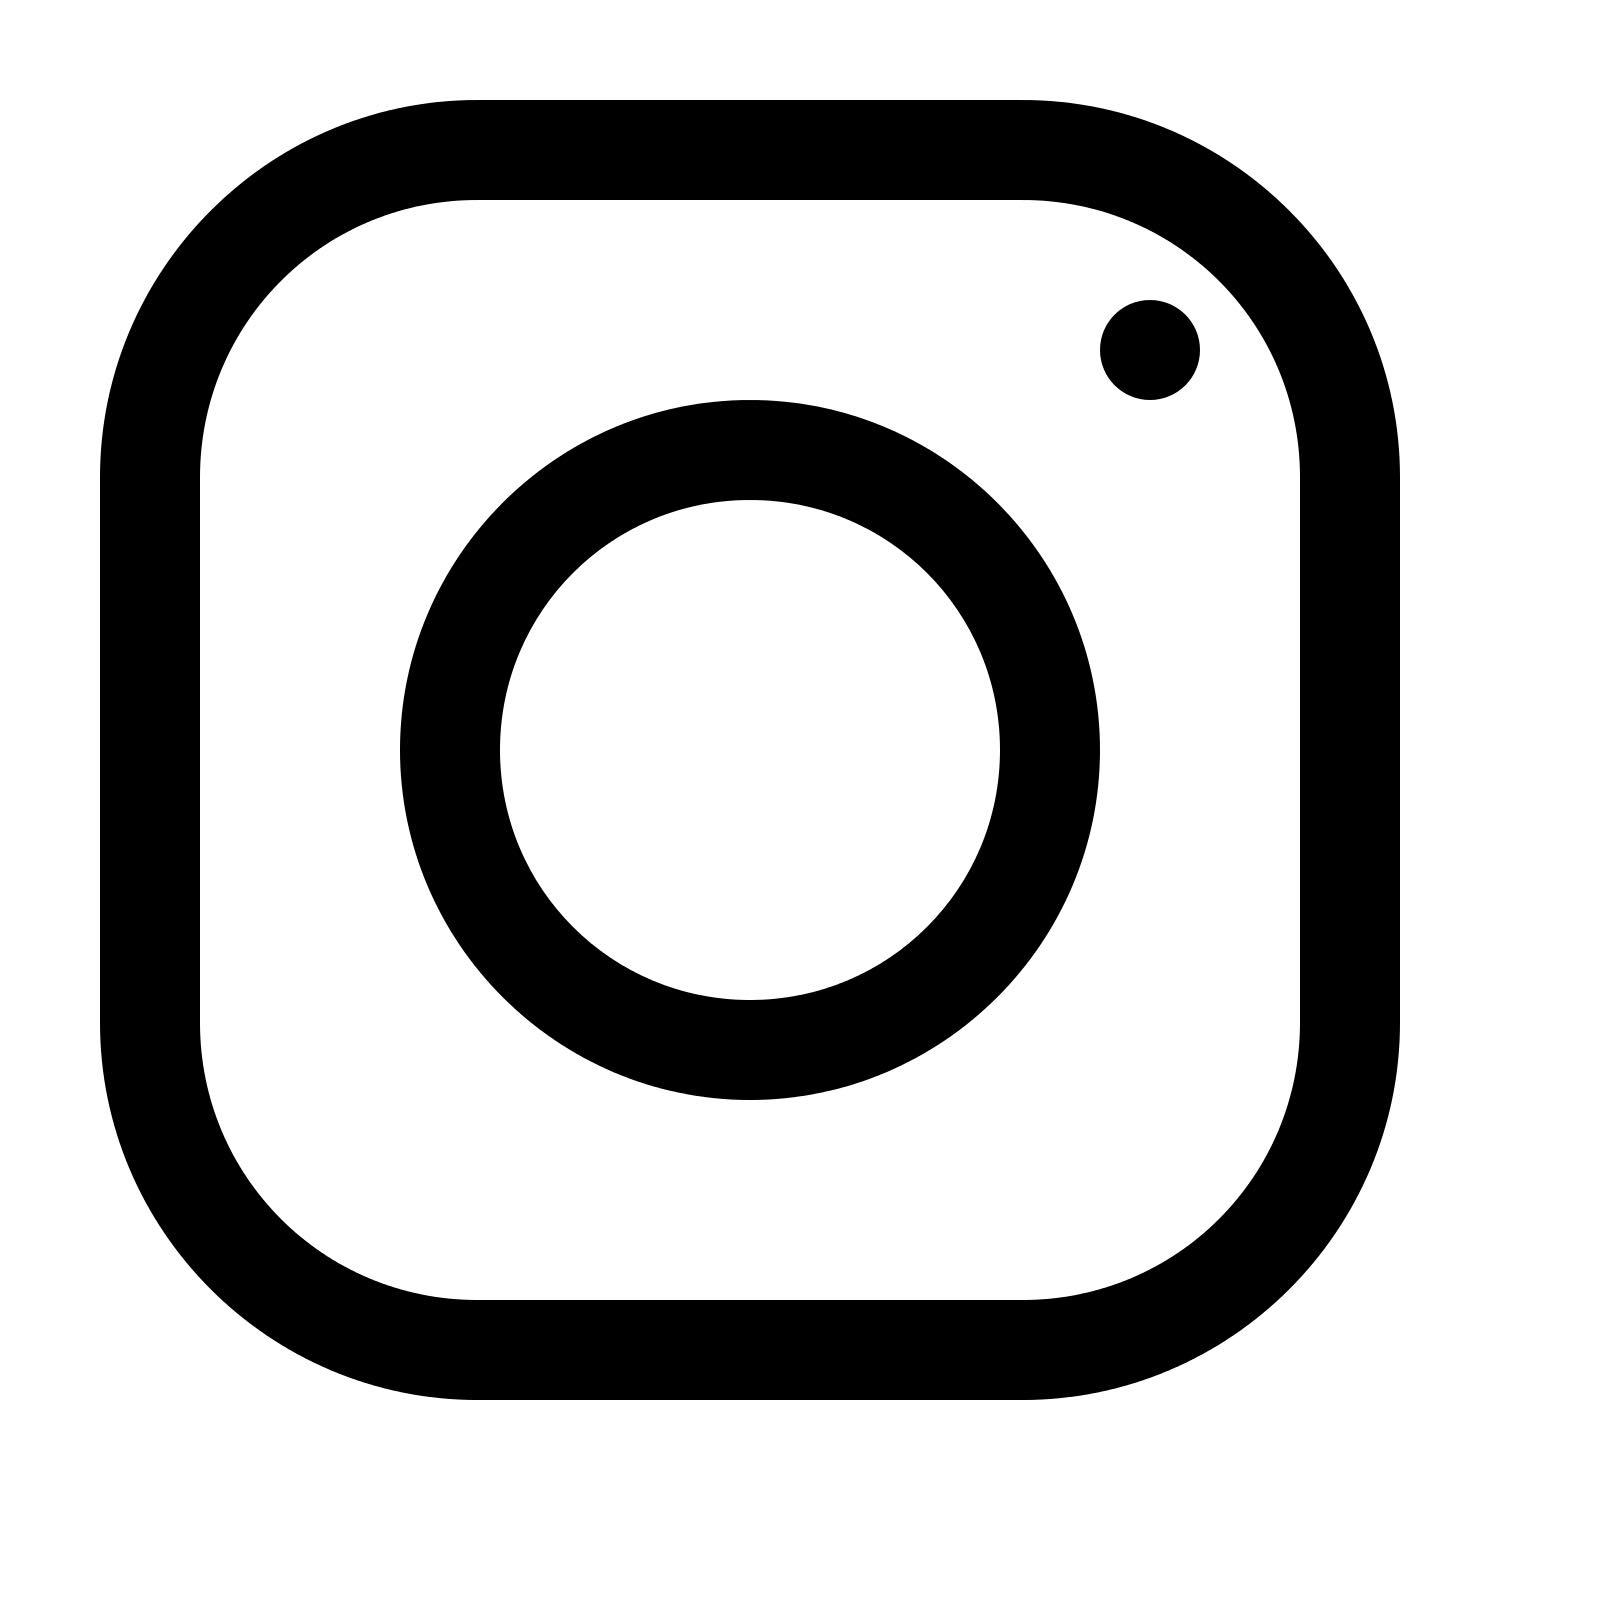 logo-ig-instagram-icon-download-icons-12